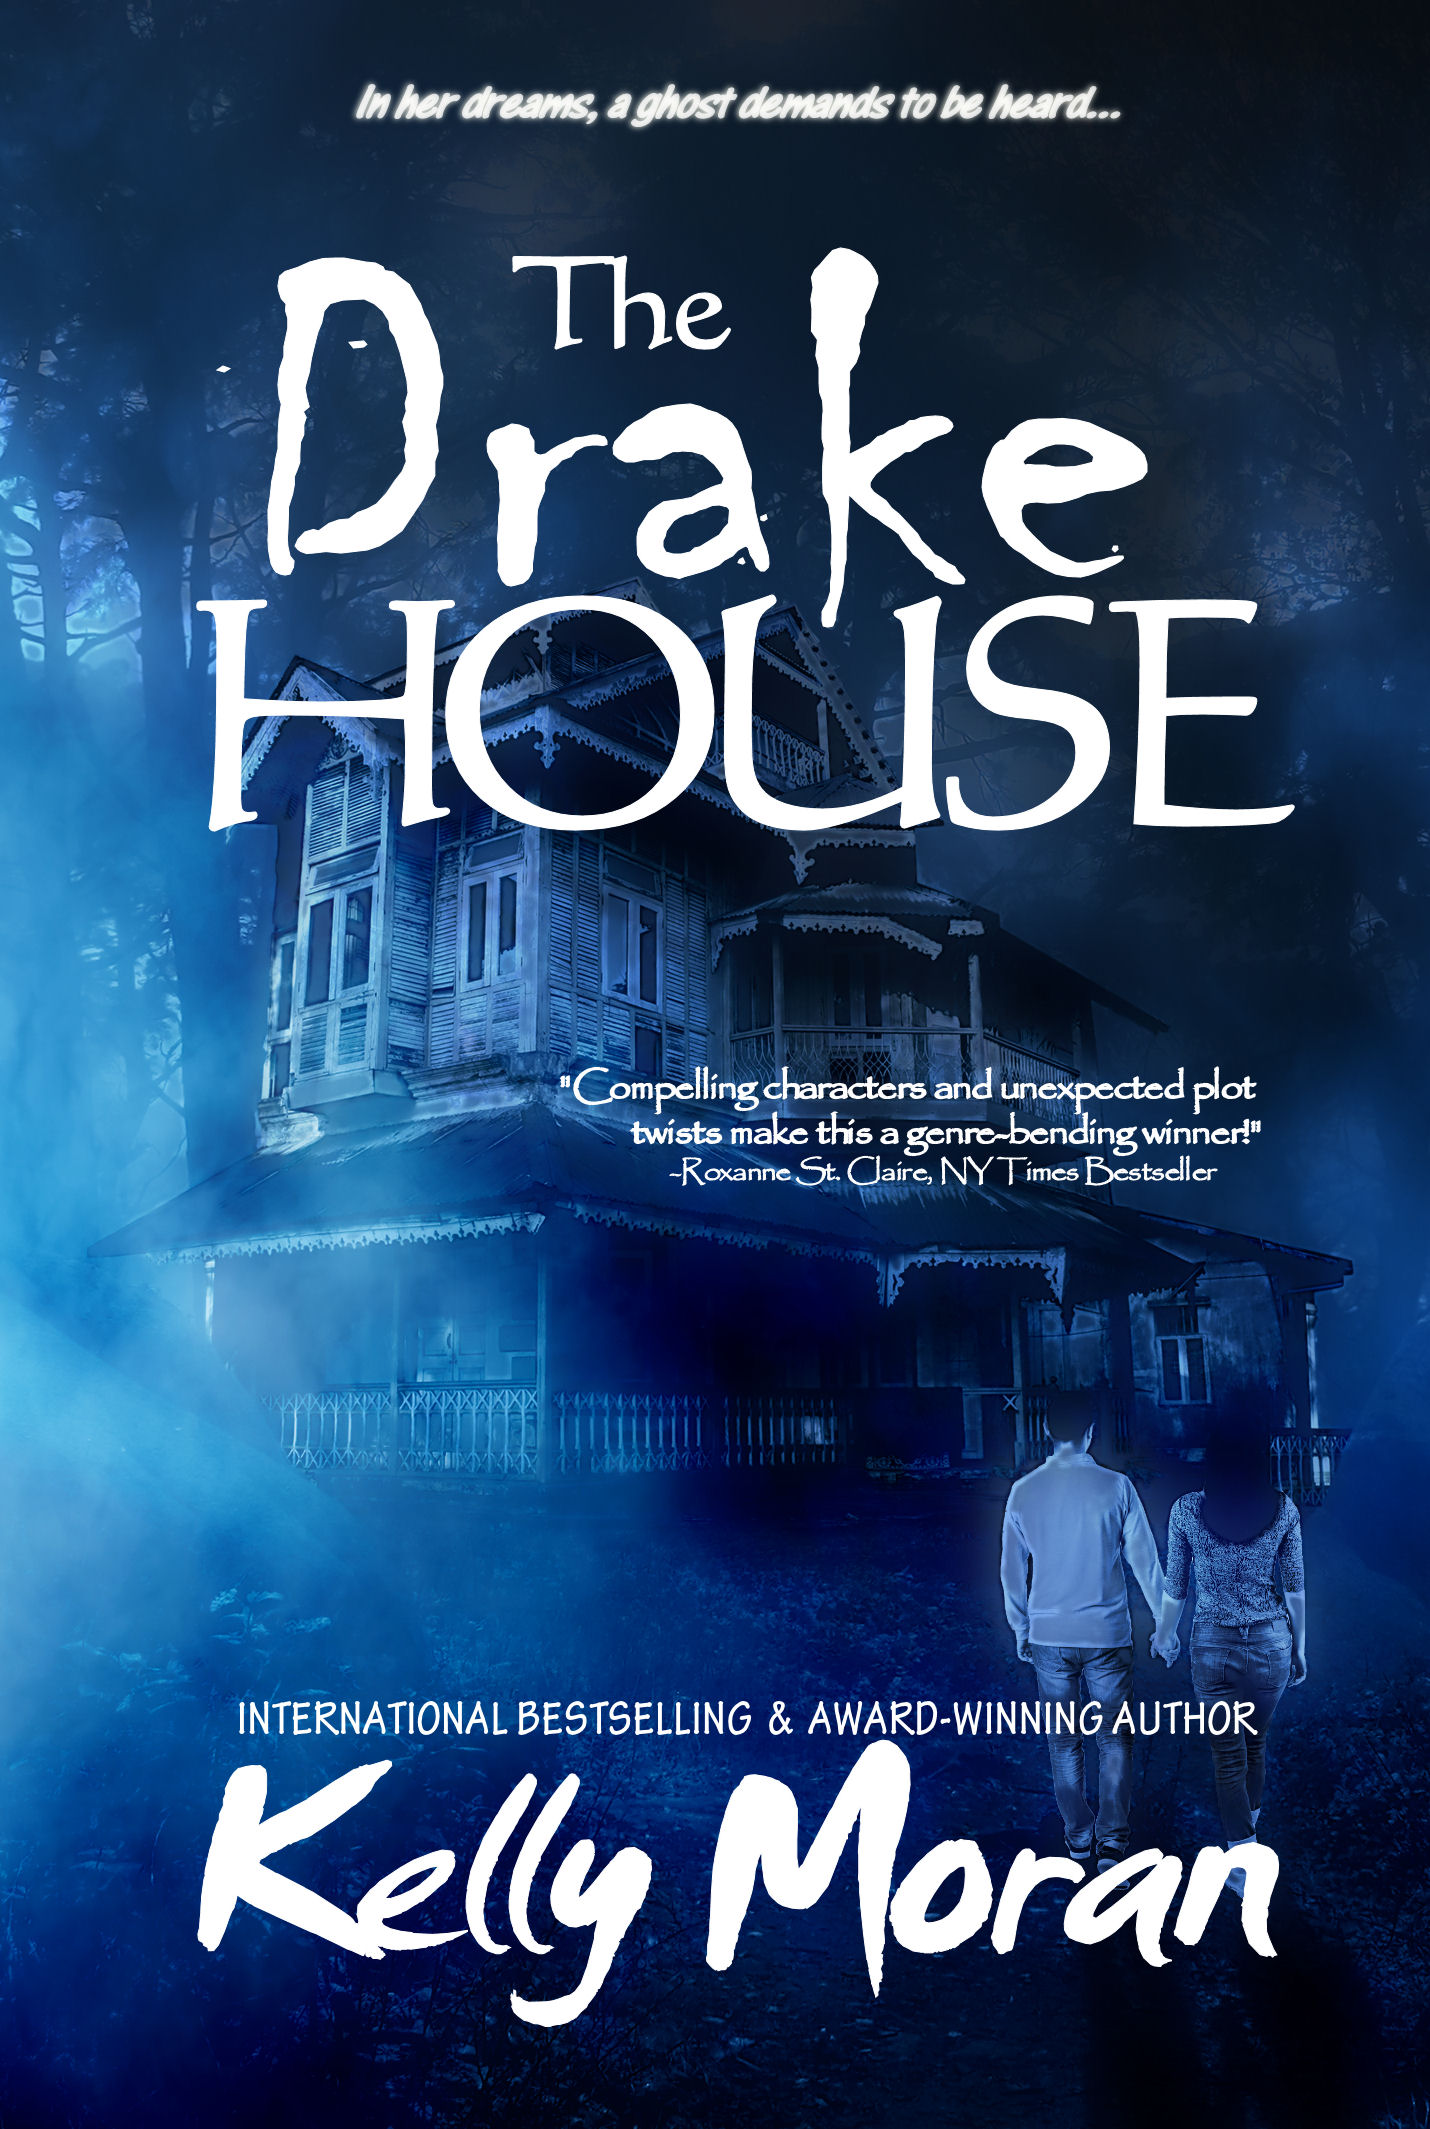 Book cover for The Drake House, available to option through OptionAvenue